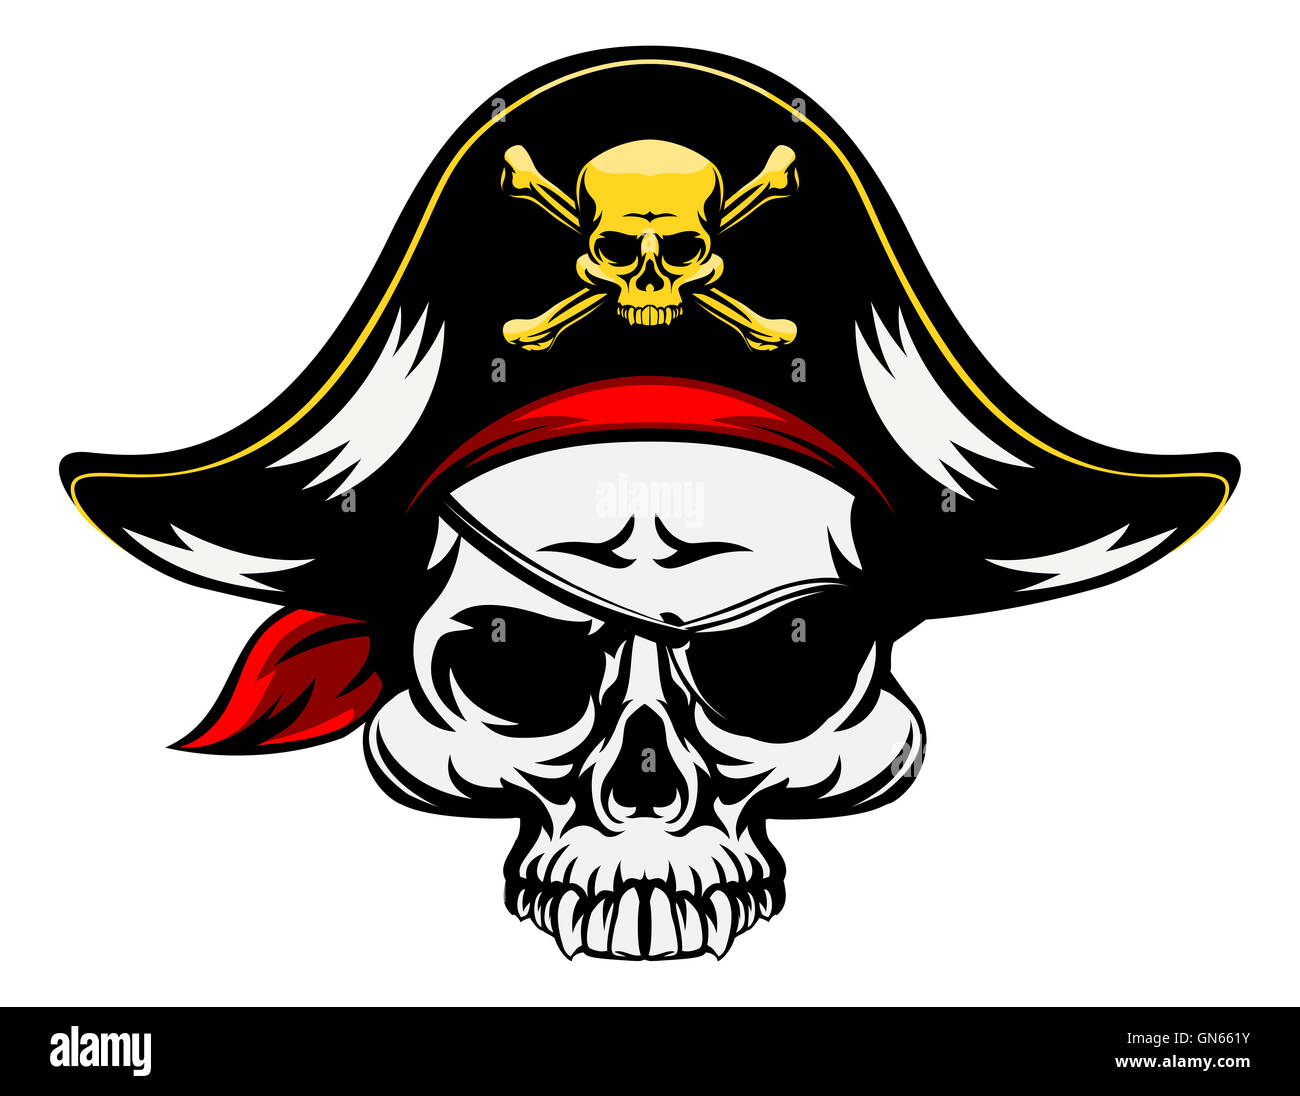 A pirate Skull wearing a tricorn hat and an eyepatch Stock Photo